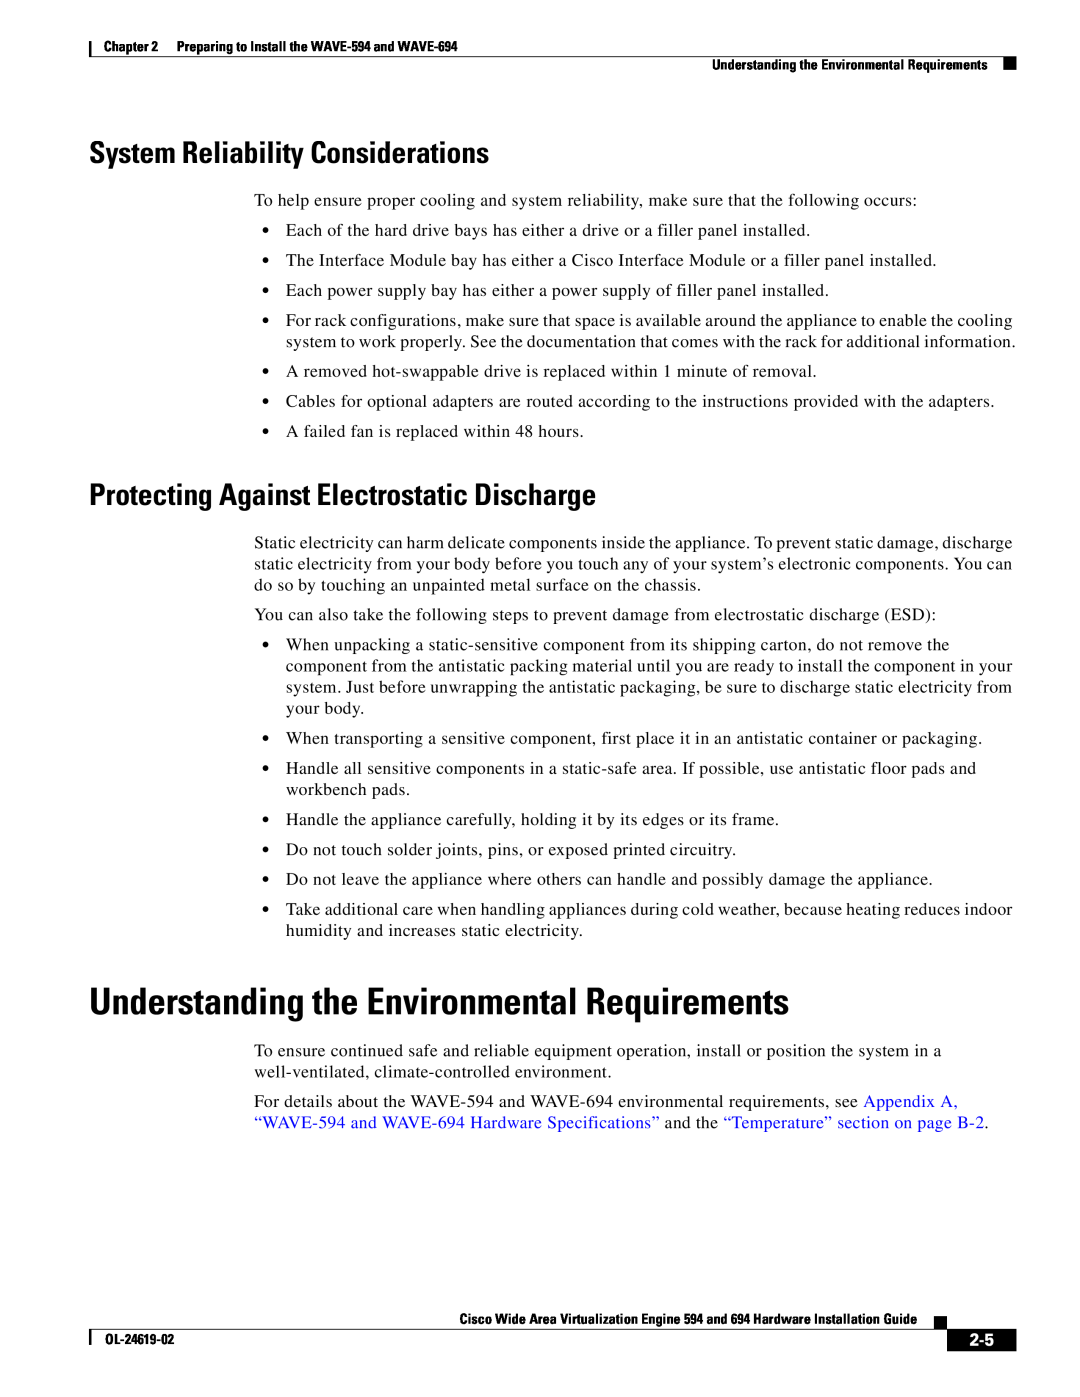 Cisco Systems 694, WAVE594K9 manual Understanding the Environmental Requirements, System Reliability Considerations 